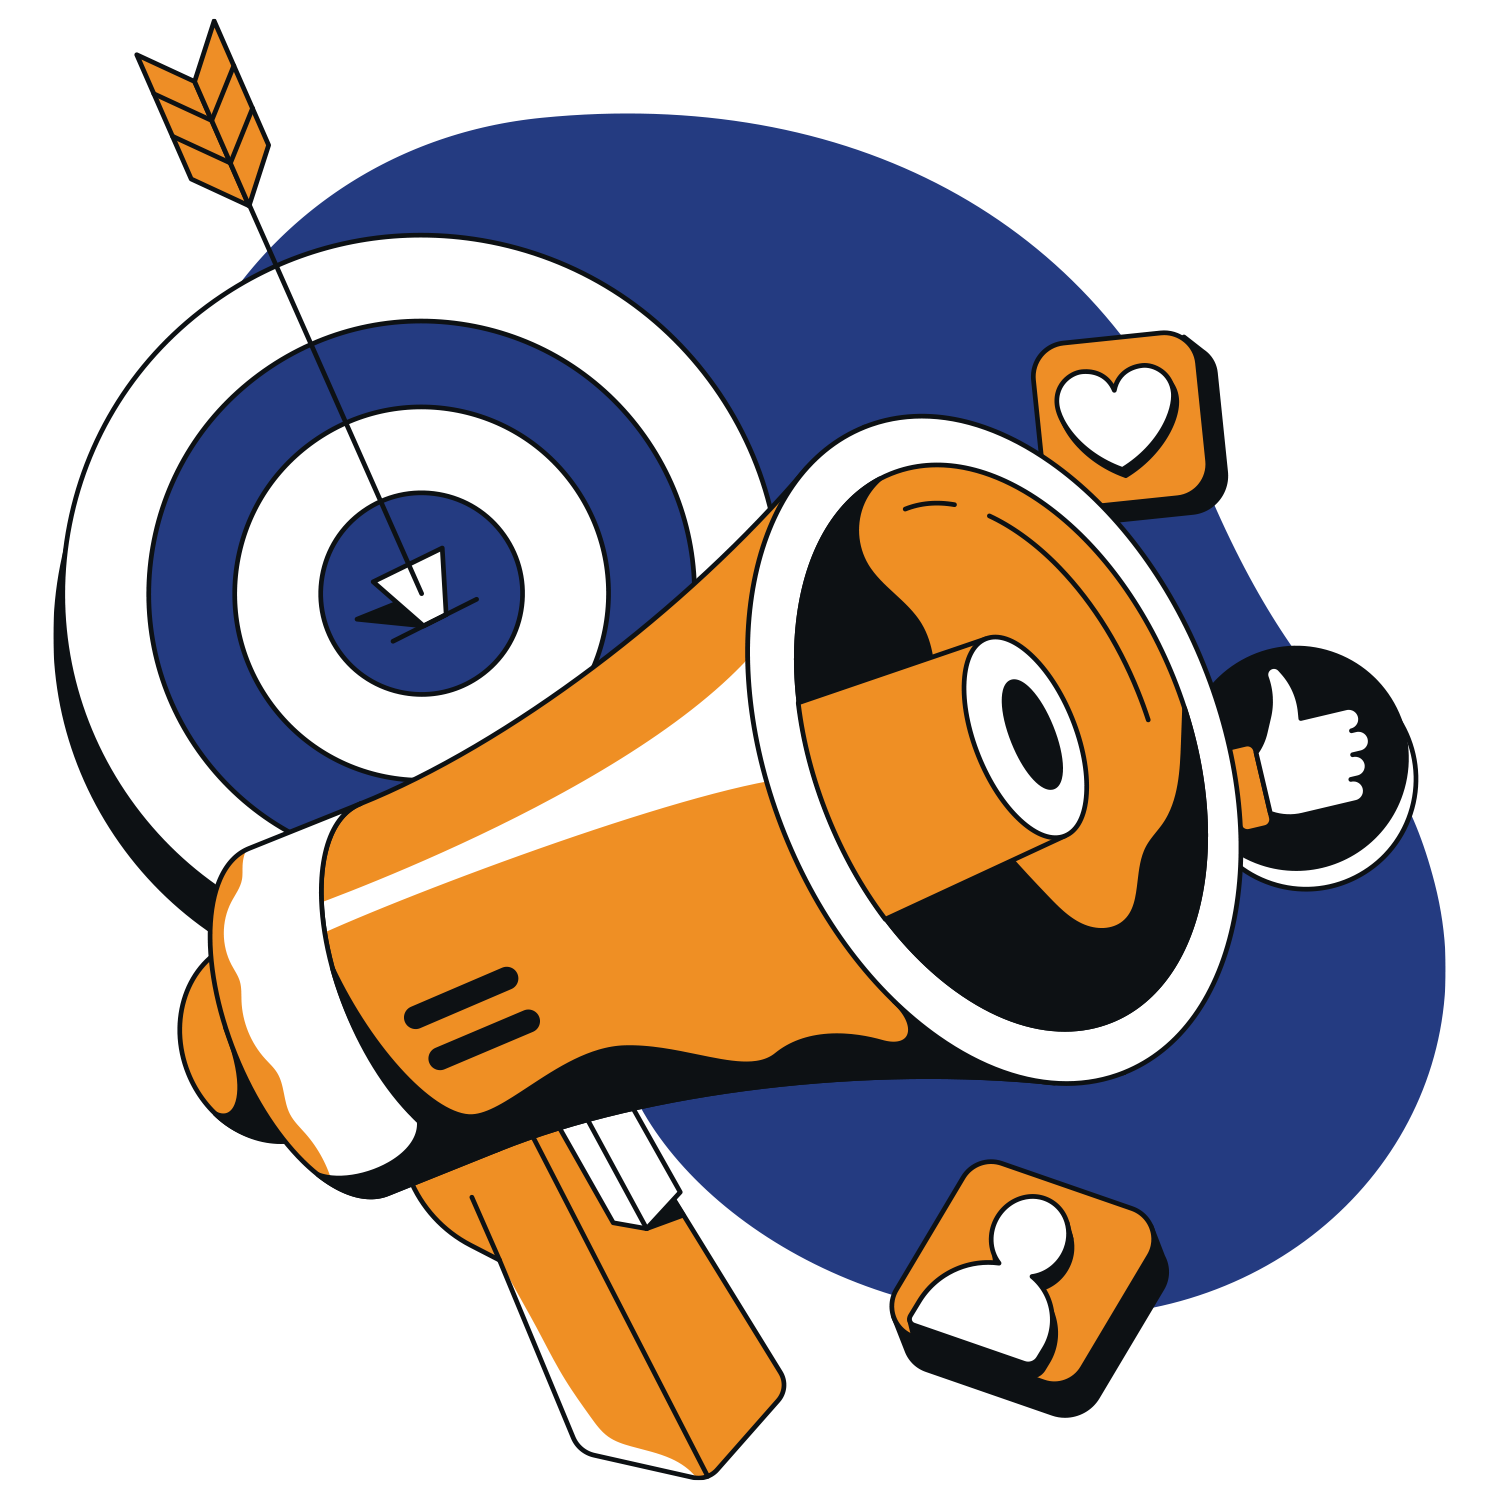 Image of a megaphone, a target and heart and thumbs up icons